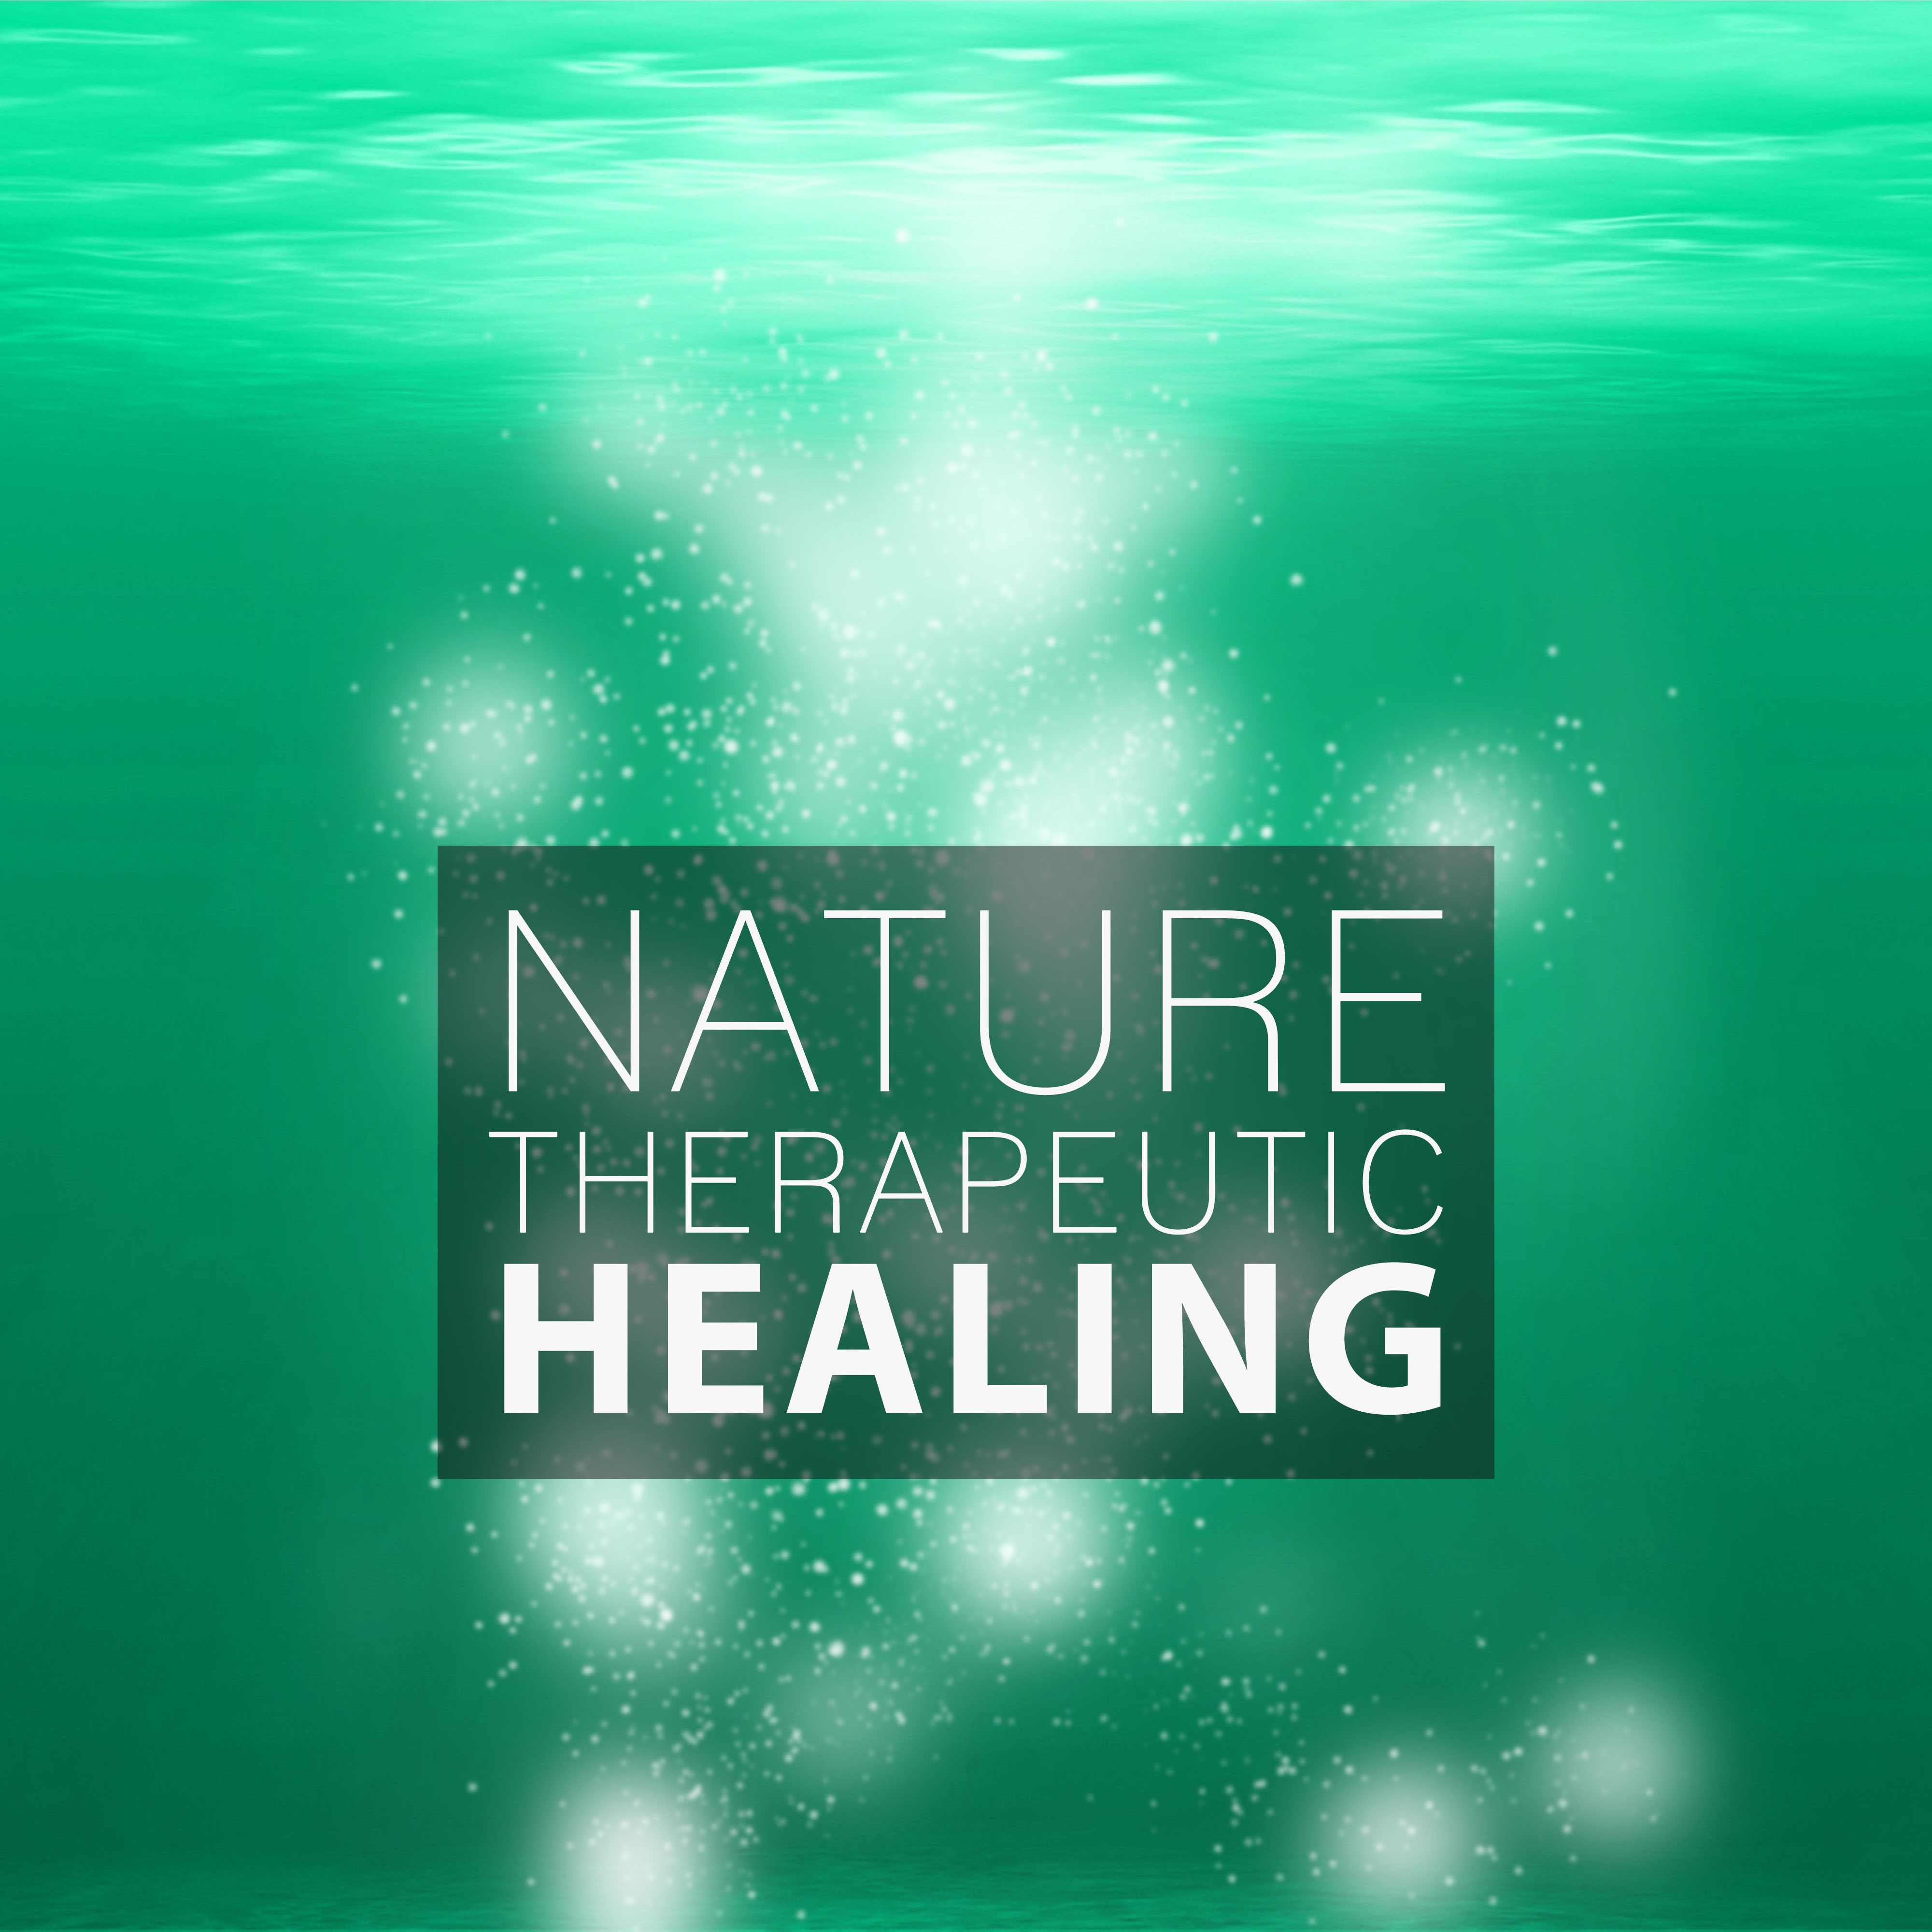 Nature Therapeutic Healing – Natural Ambience, Deep Nature, Cold Water, Resting Sounds